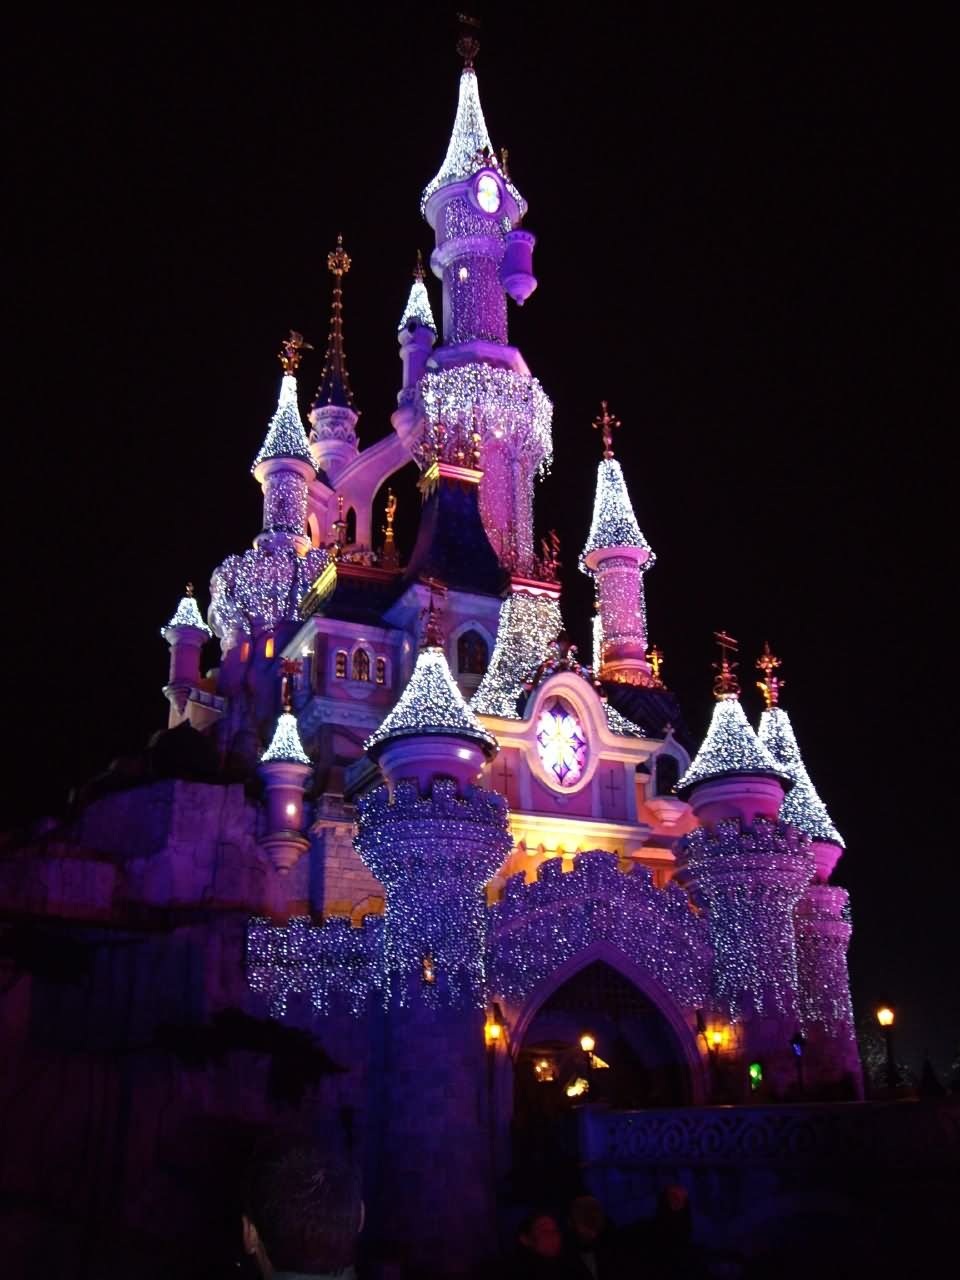 Awesome Night View Of Disneyland Paris Castle